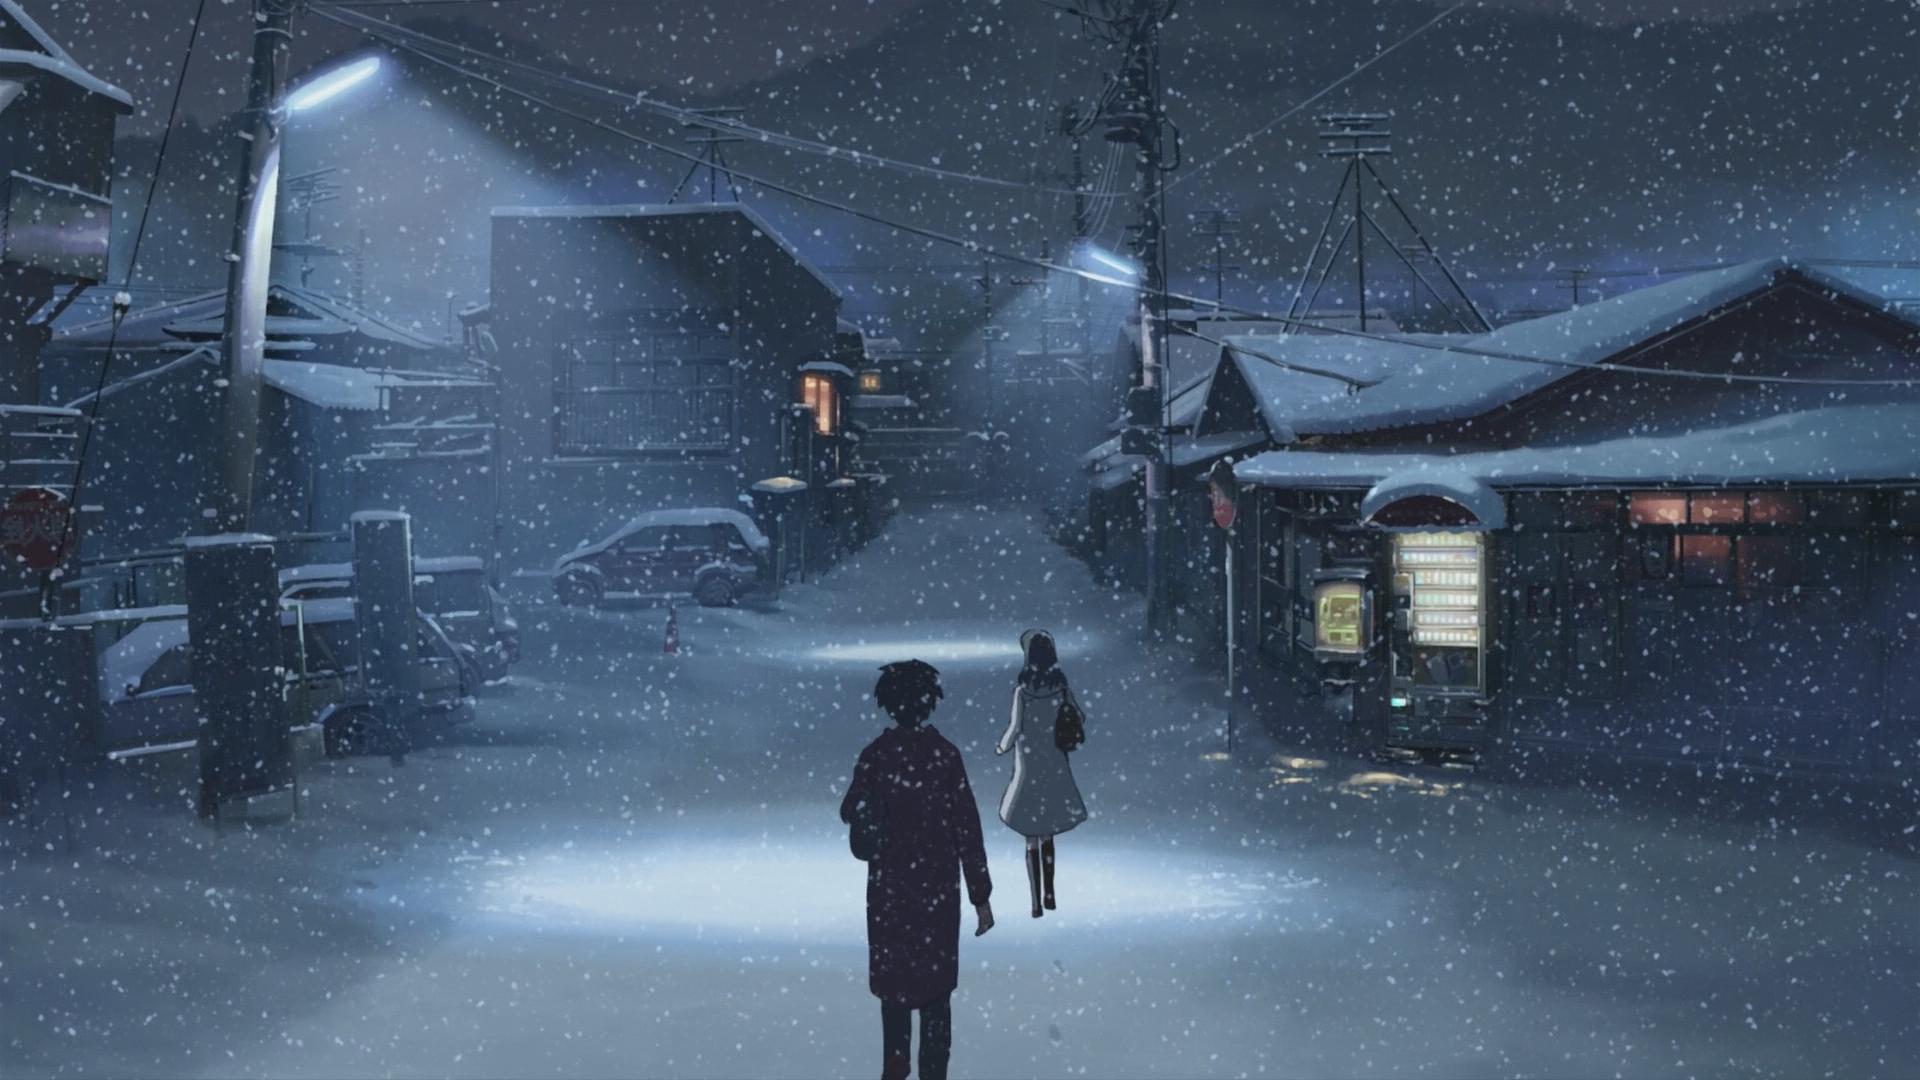 anime winter wallpaper,action adventure game,snow,pc game,winter storm,darkness